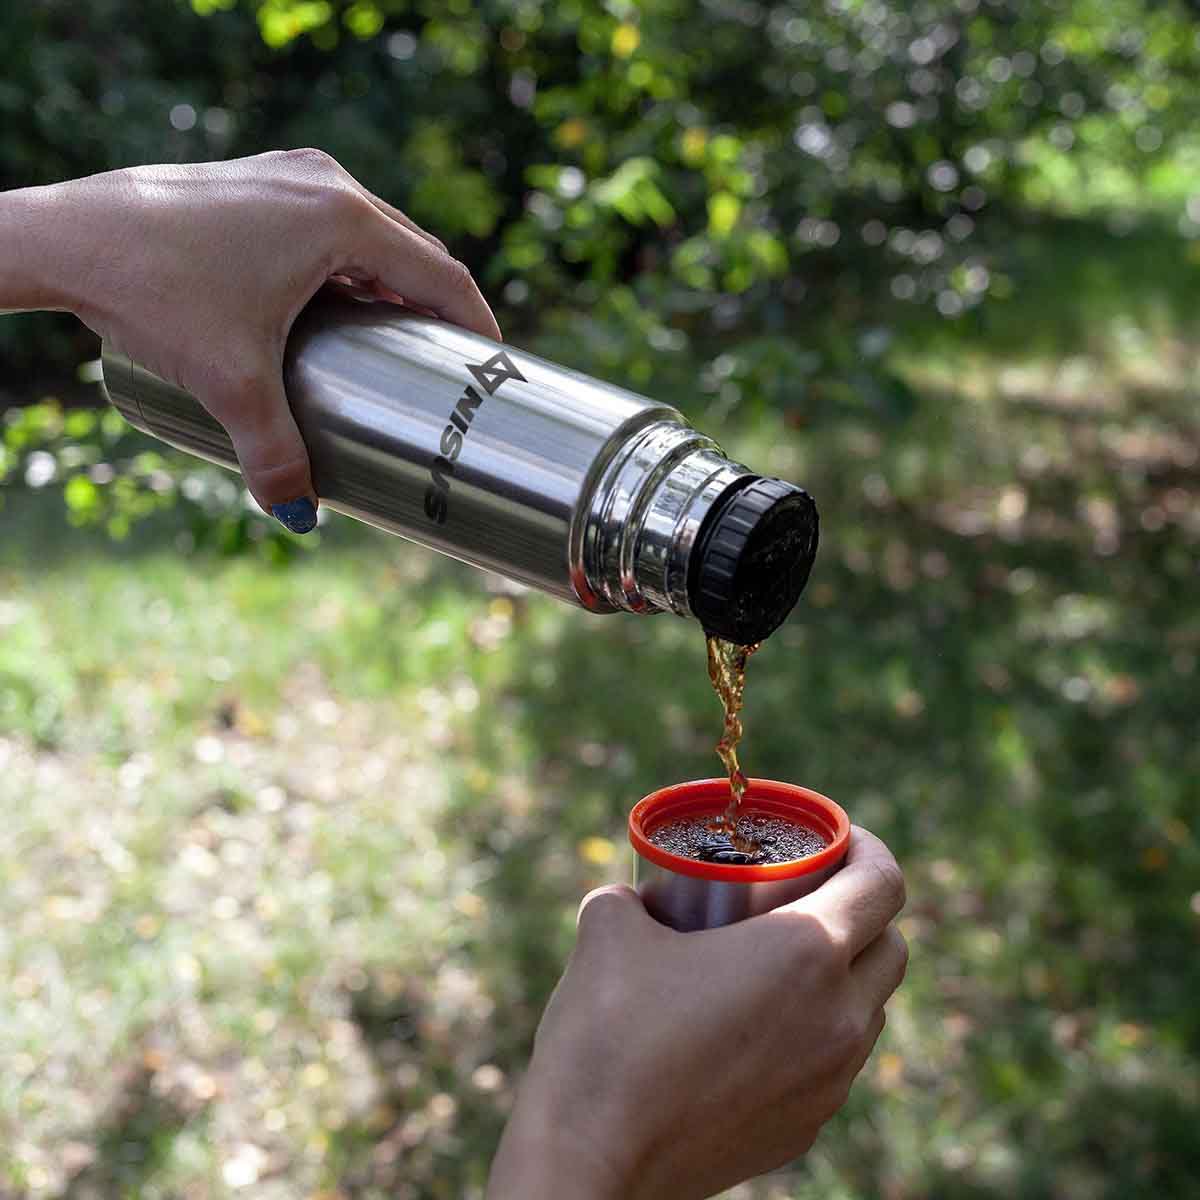 A girl pouring the drink out of the Portable Stainless Steel Vacuum Flask into Lid Cup